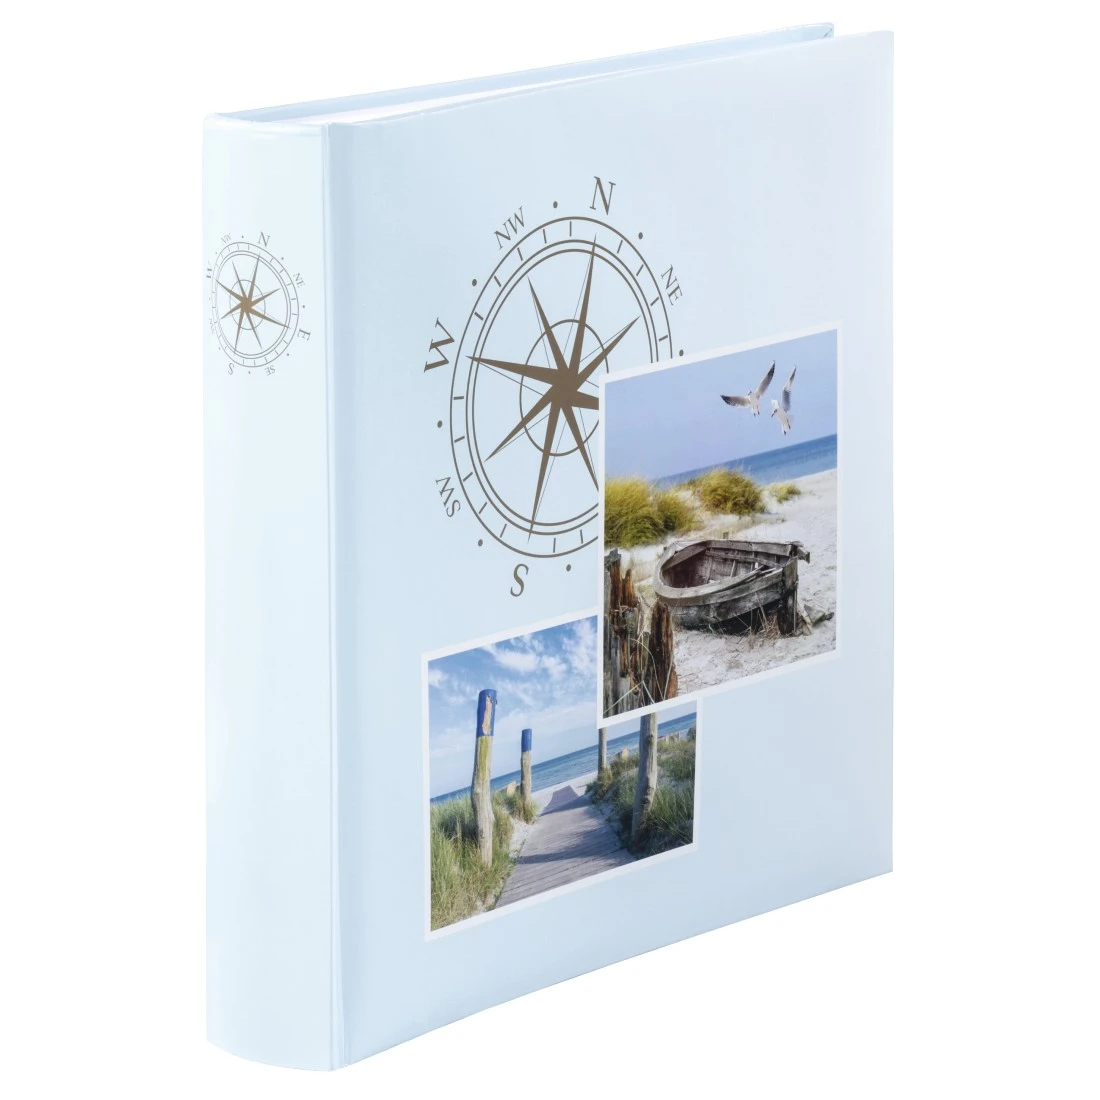 Album photo grand format Compass, 30 x 30 cm, 100 pages blanches